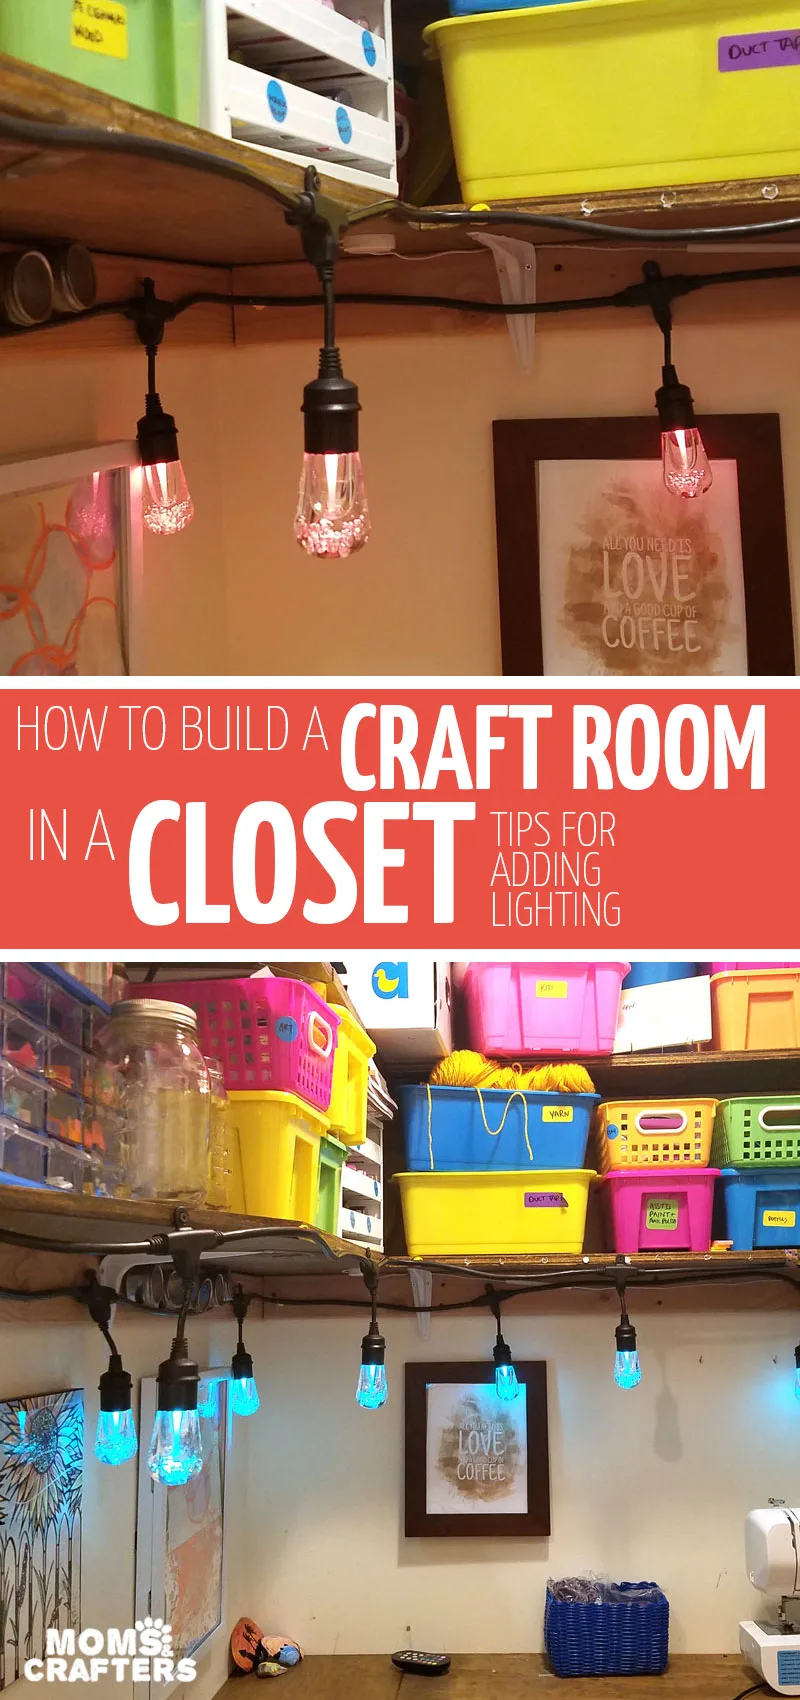 Click if you think you have no space for a craft room! Learn how I made the coolest craft room in a closet with this amazing craft room reveal and some super craft room hacks #craftroom #homedecor #diy